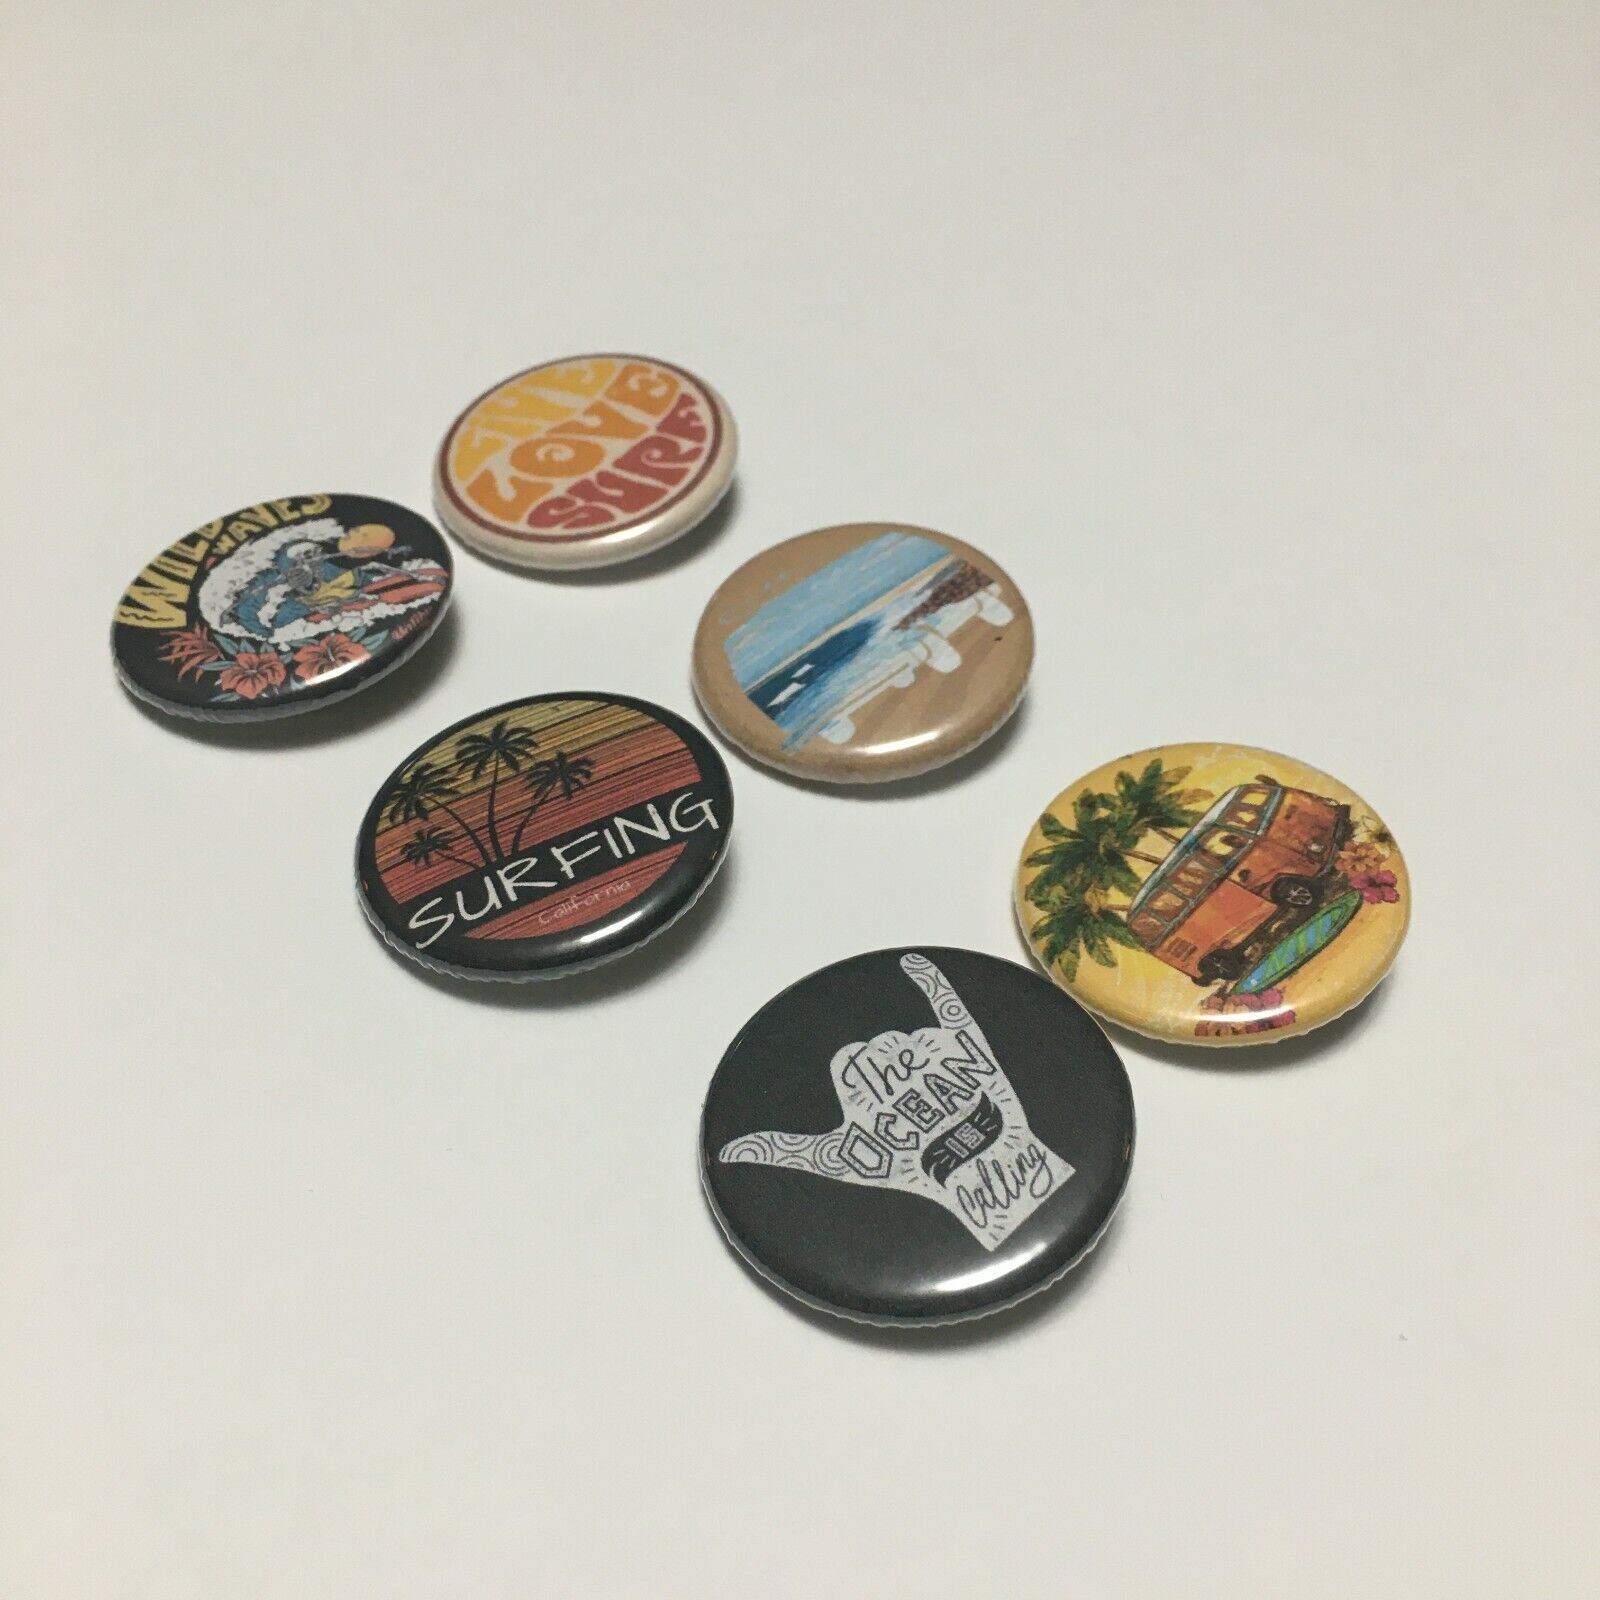 Backpack Buttons.  Surfing design pinback buttons.  (S6A)